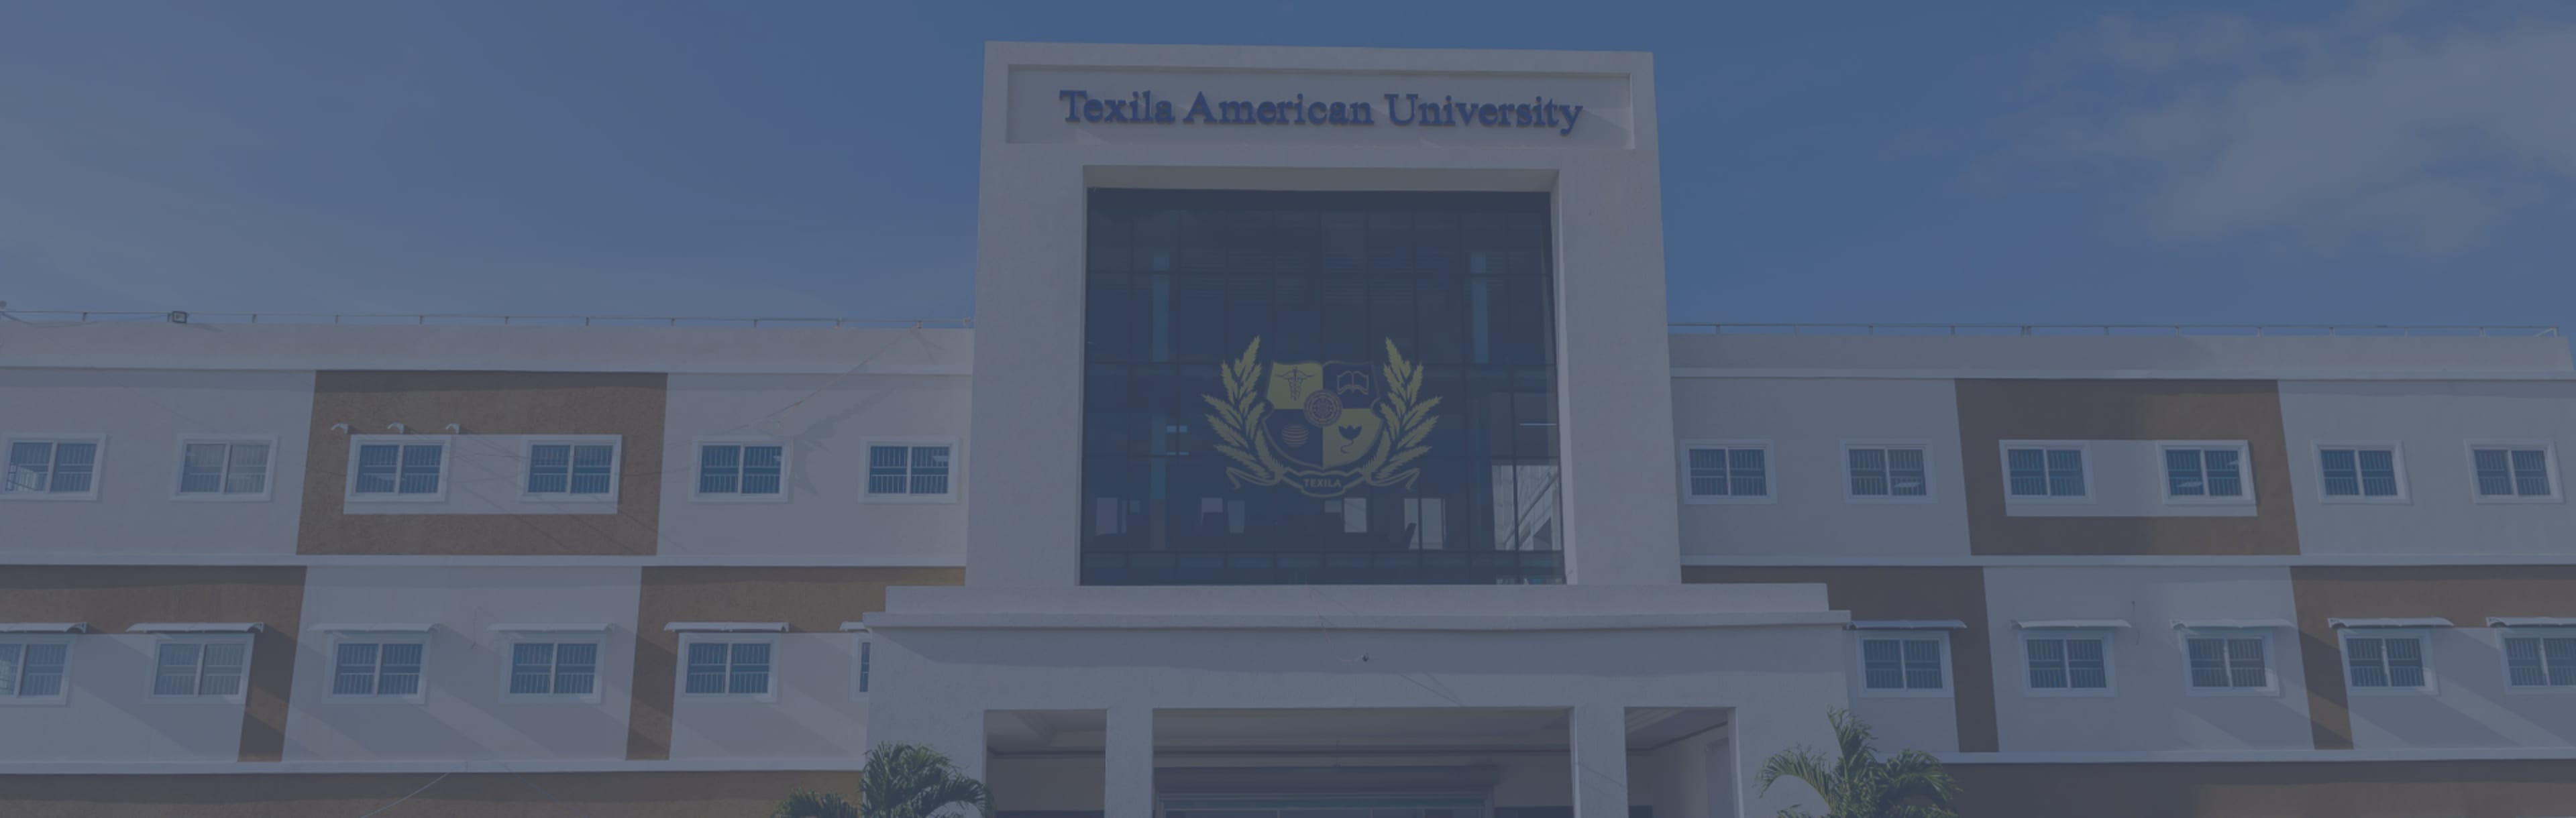 Texila American University Master of Business Administration